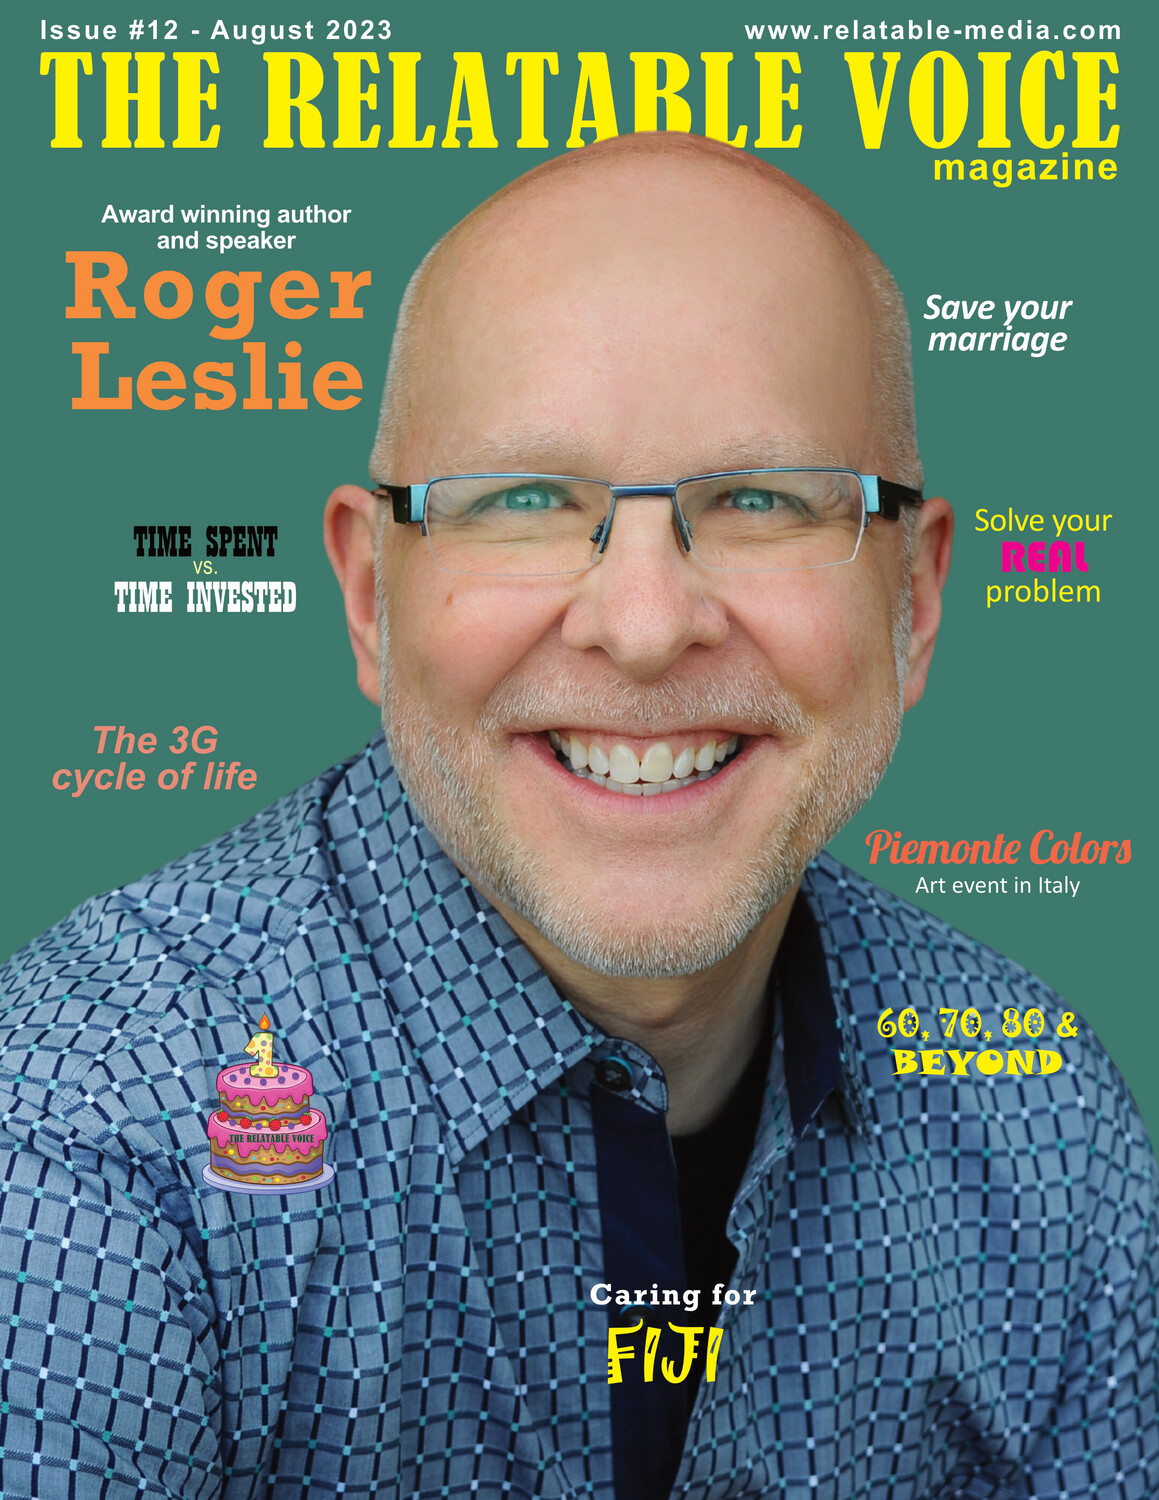 The Relatable Voice magazine - Issue #12, August 2023